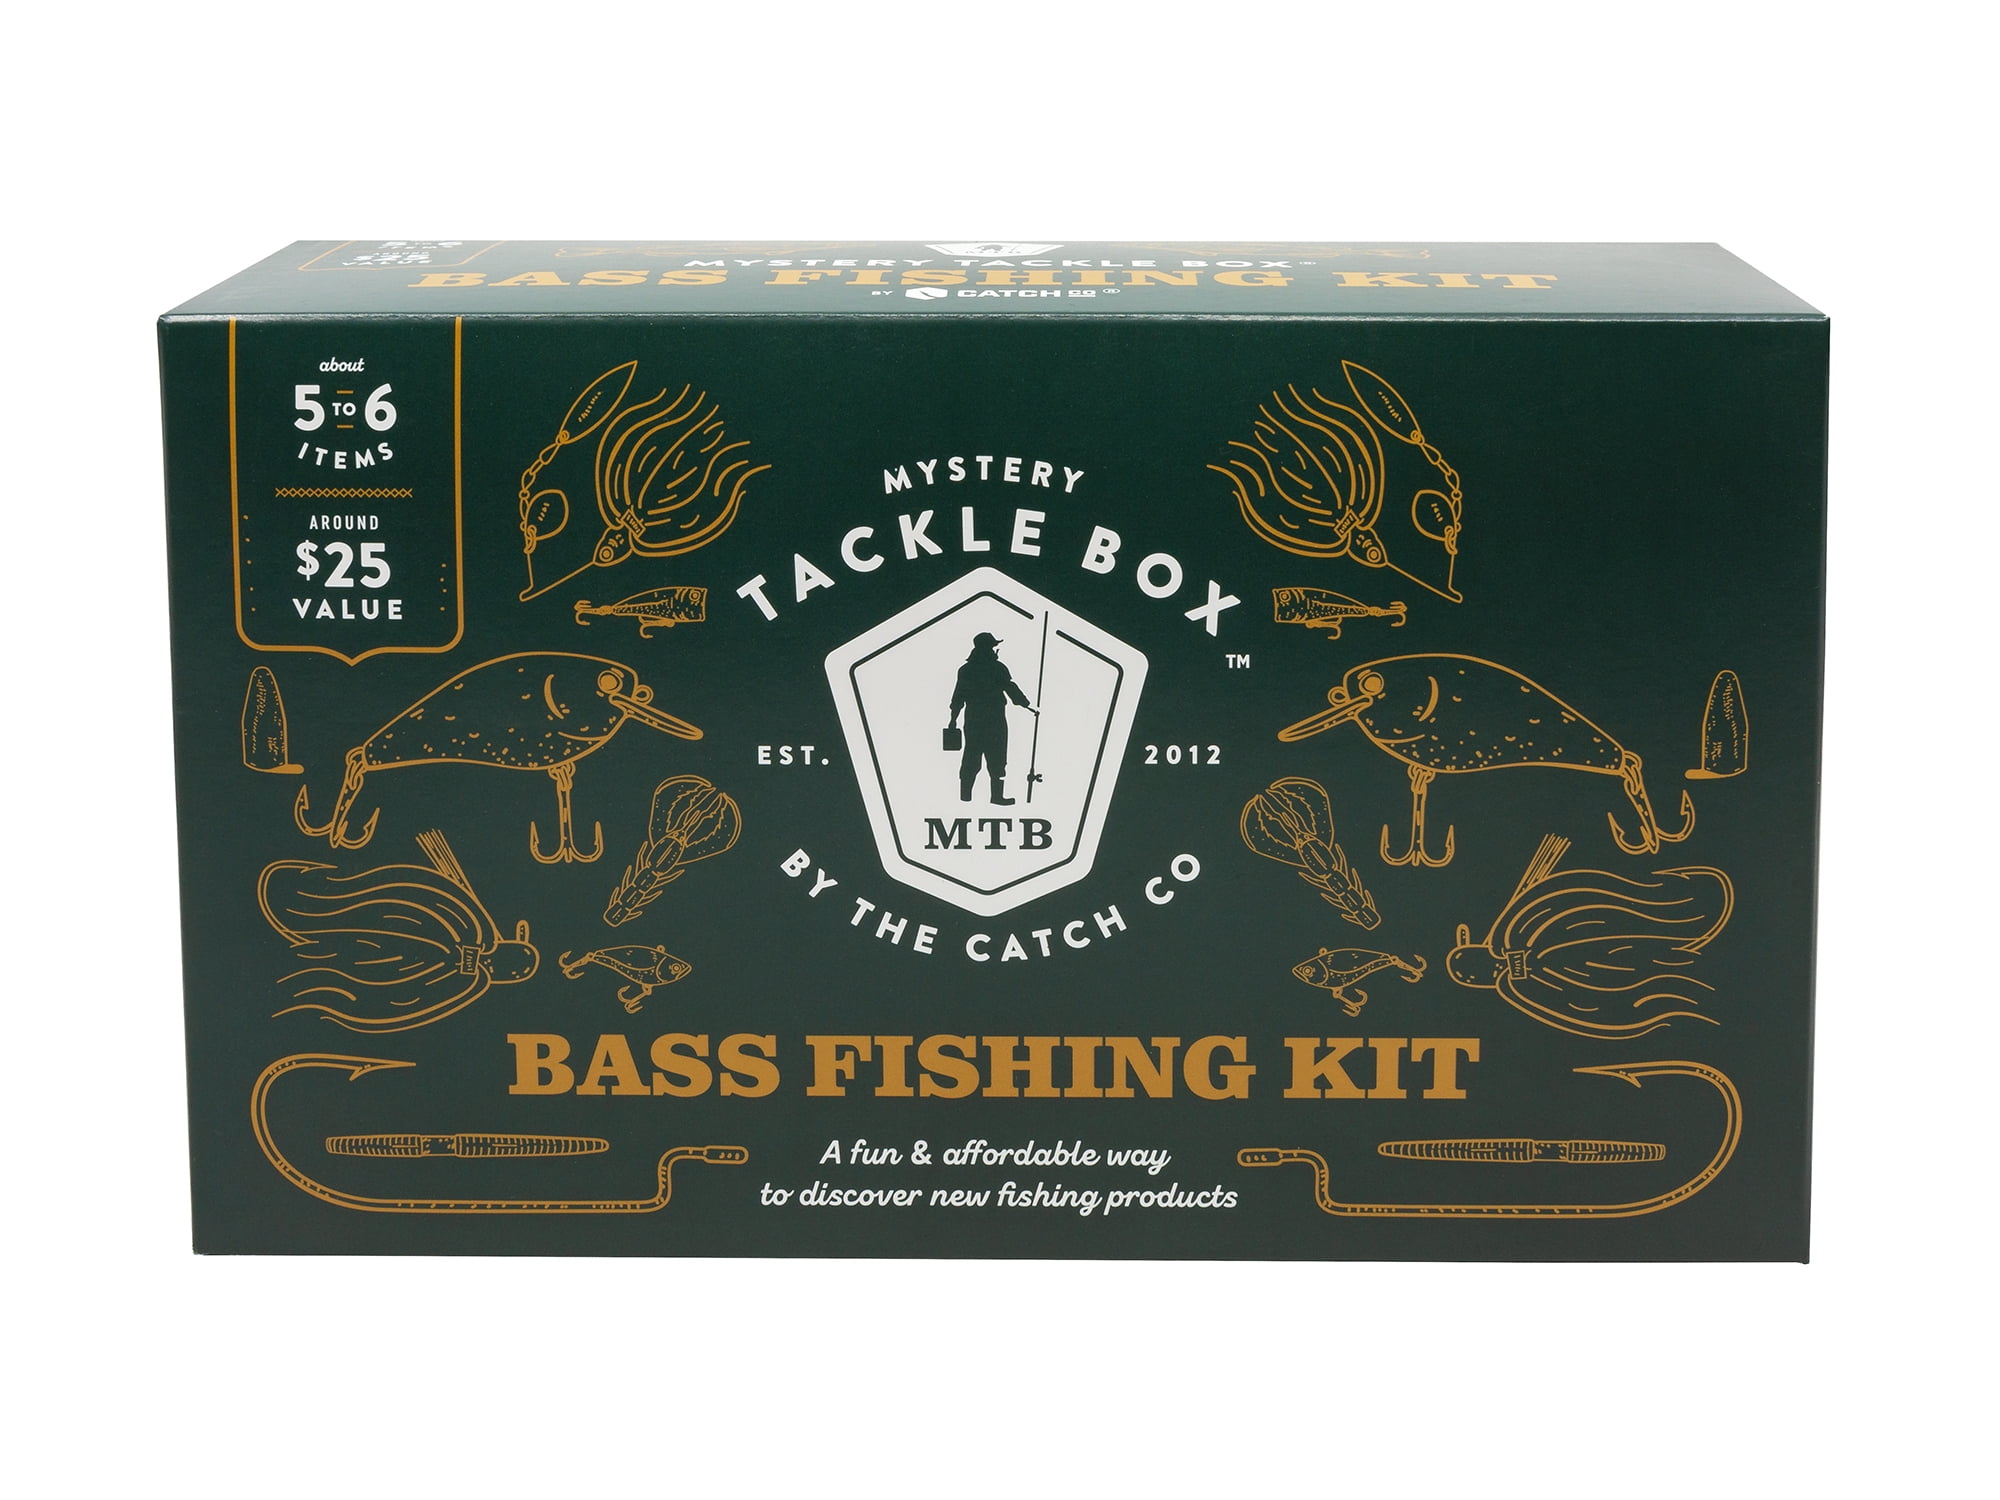  Catch Co Mystery Tackle Box ELITE Bass Fishing Kit